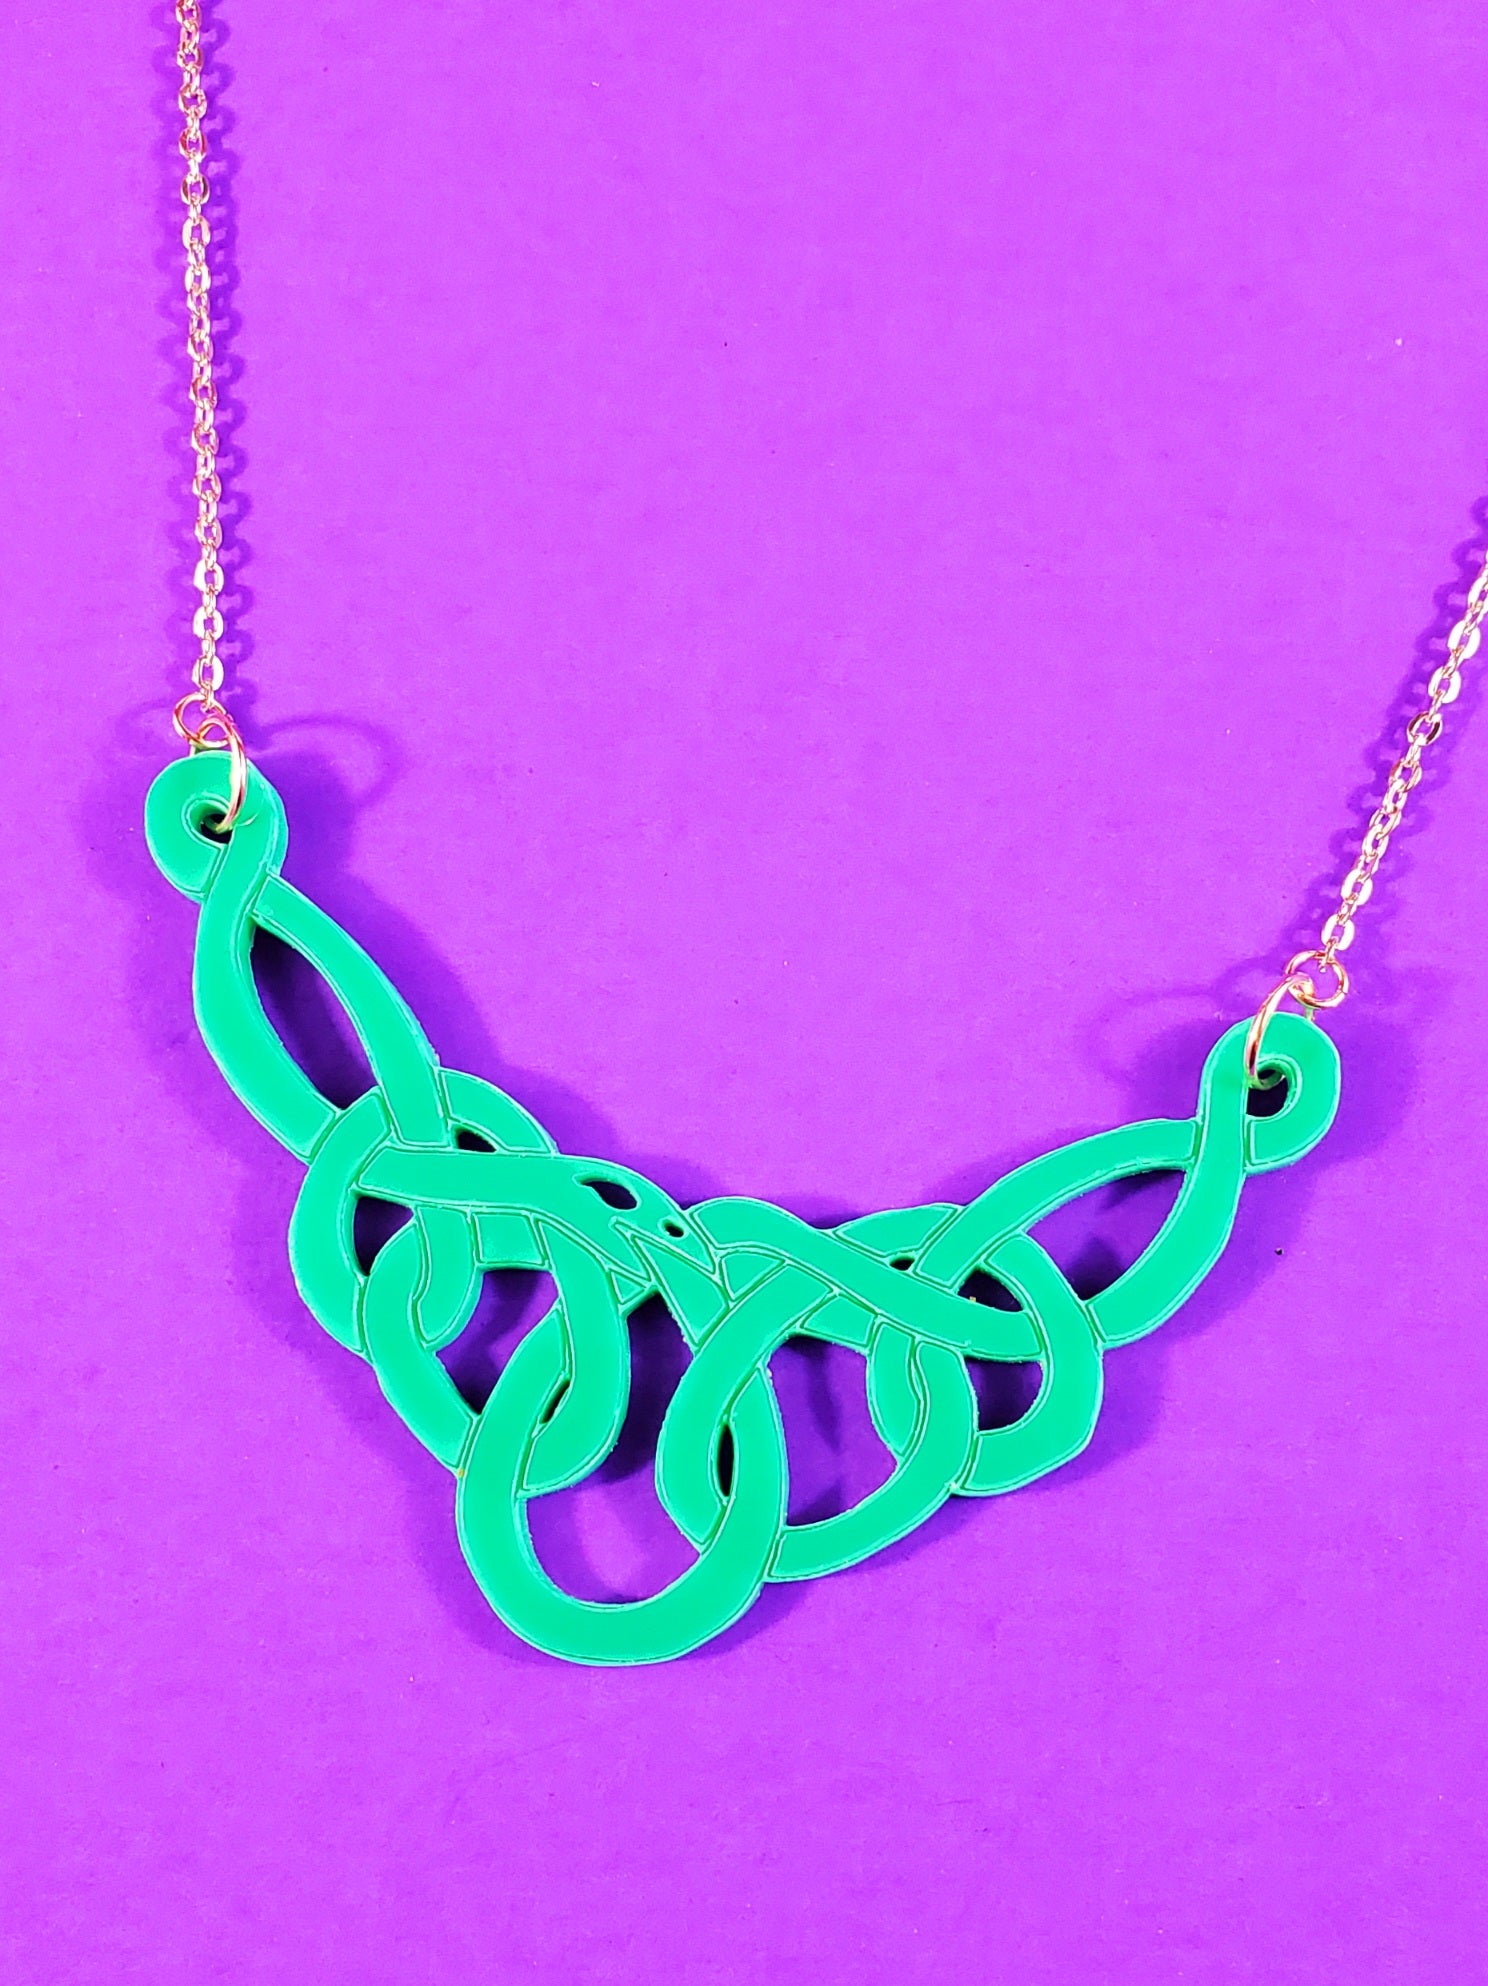 4" laser-cut bright green acrylic very coil-y snake pendant on 16" rose gold metal link chain